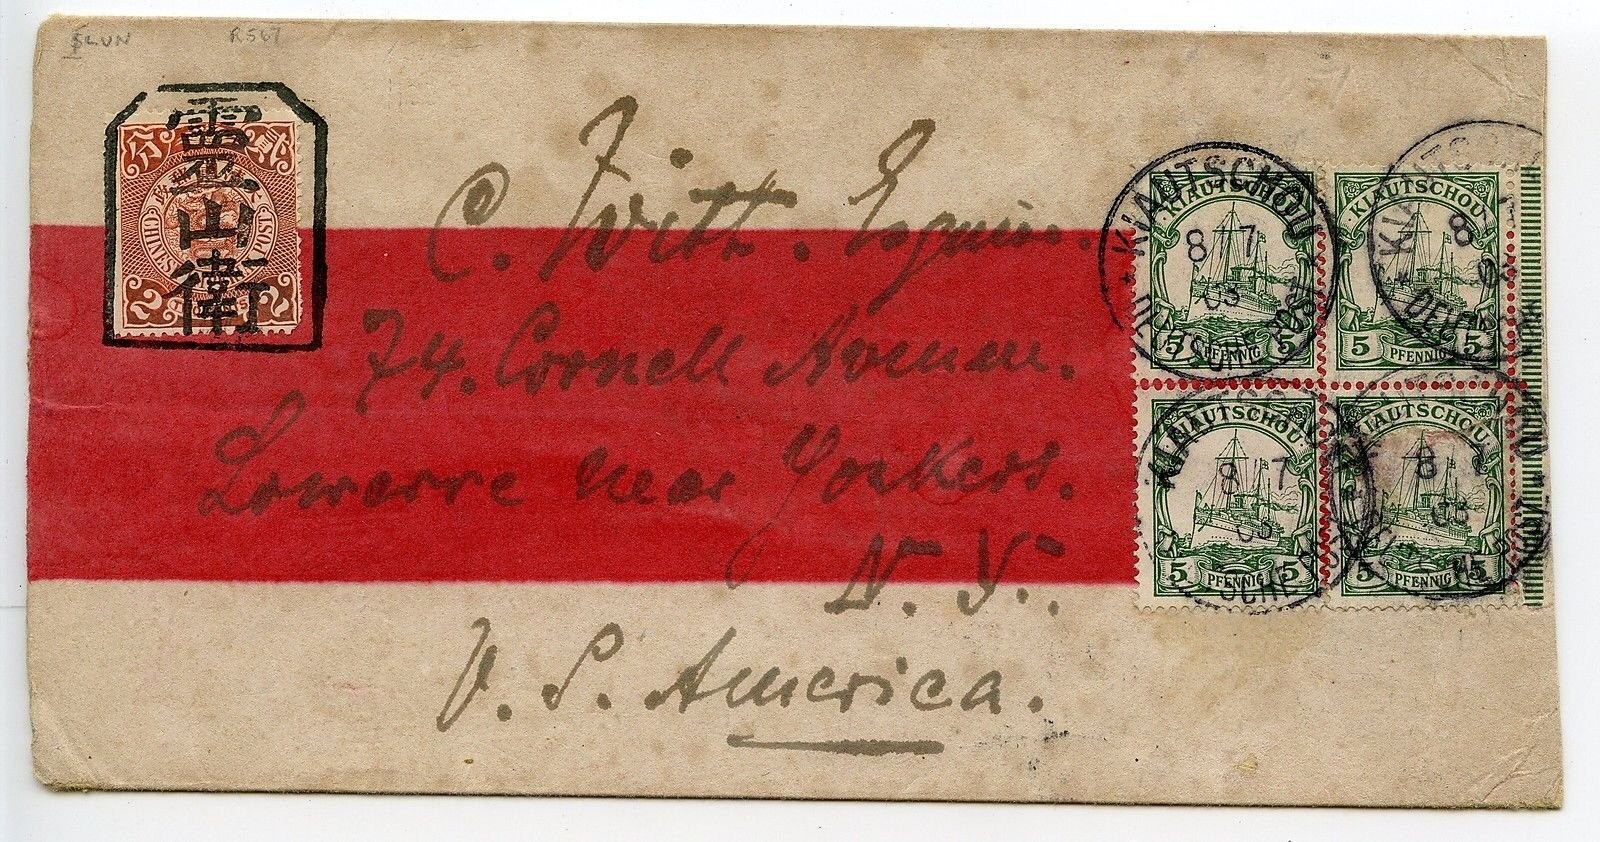 CHINA Kiautschou 1903 red band cover with mixed franking Lingshanwei tombstone